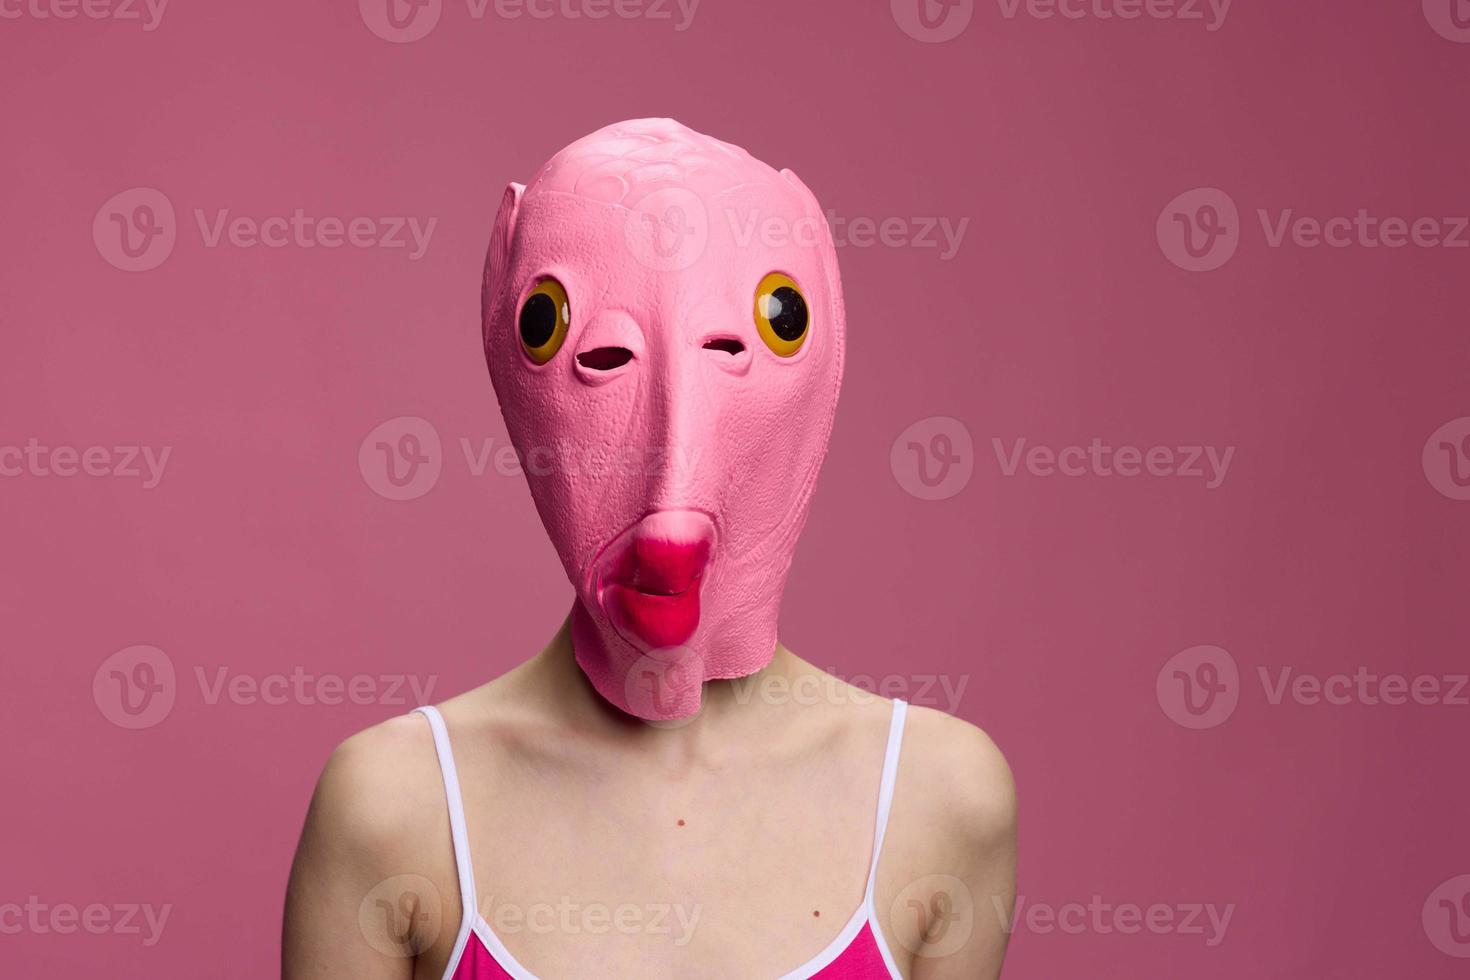 Conceptual art photo of a sexy woman in a fish mask for Halloween on a pink background